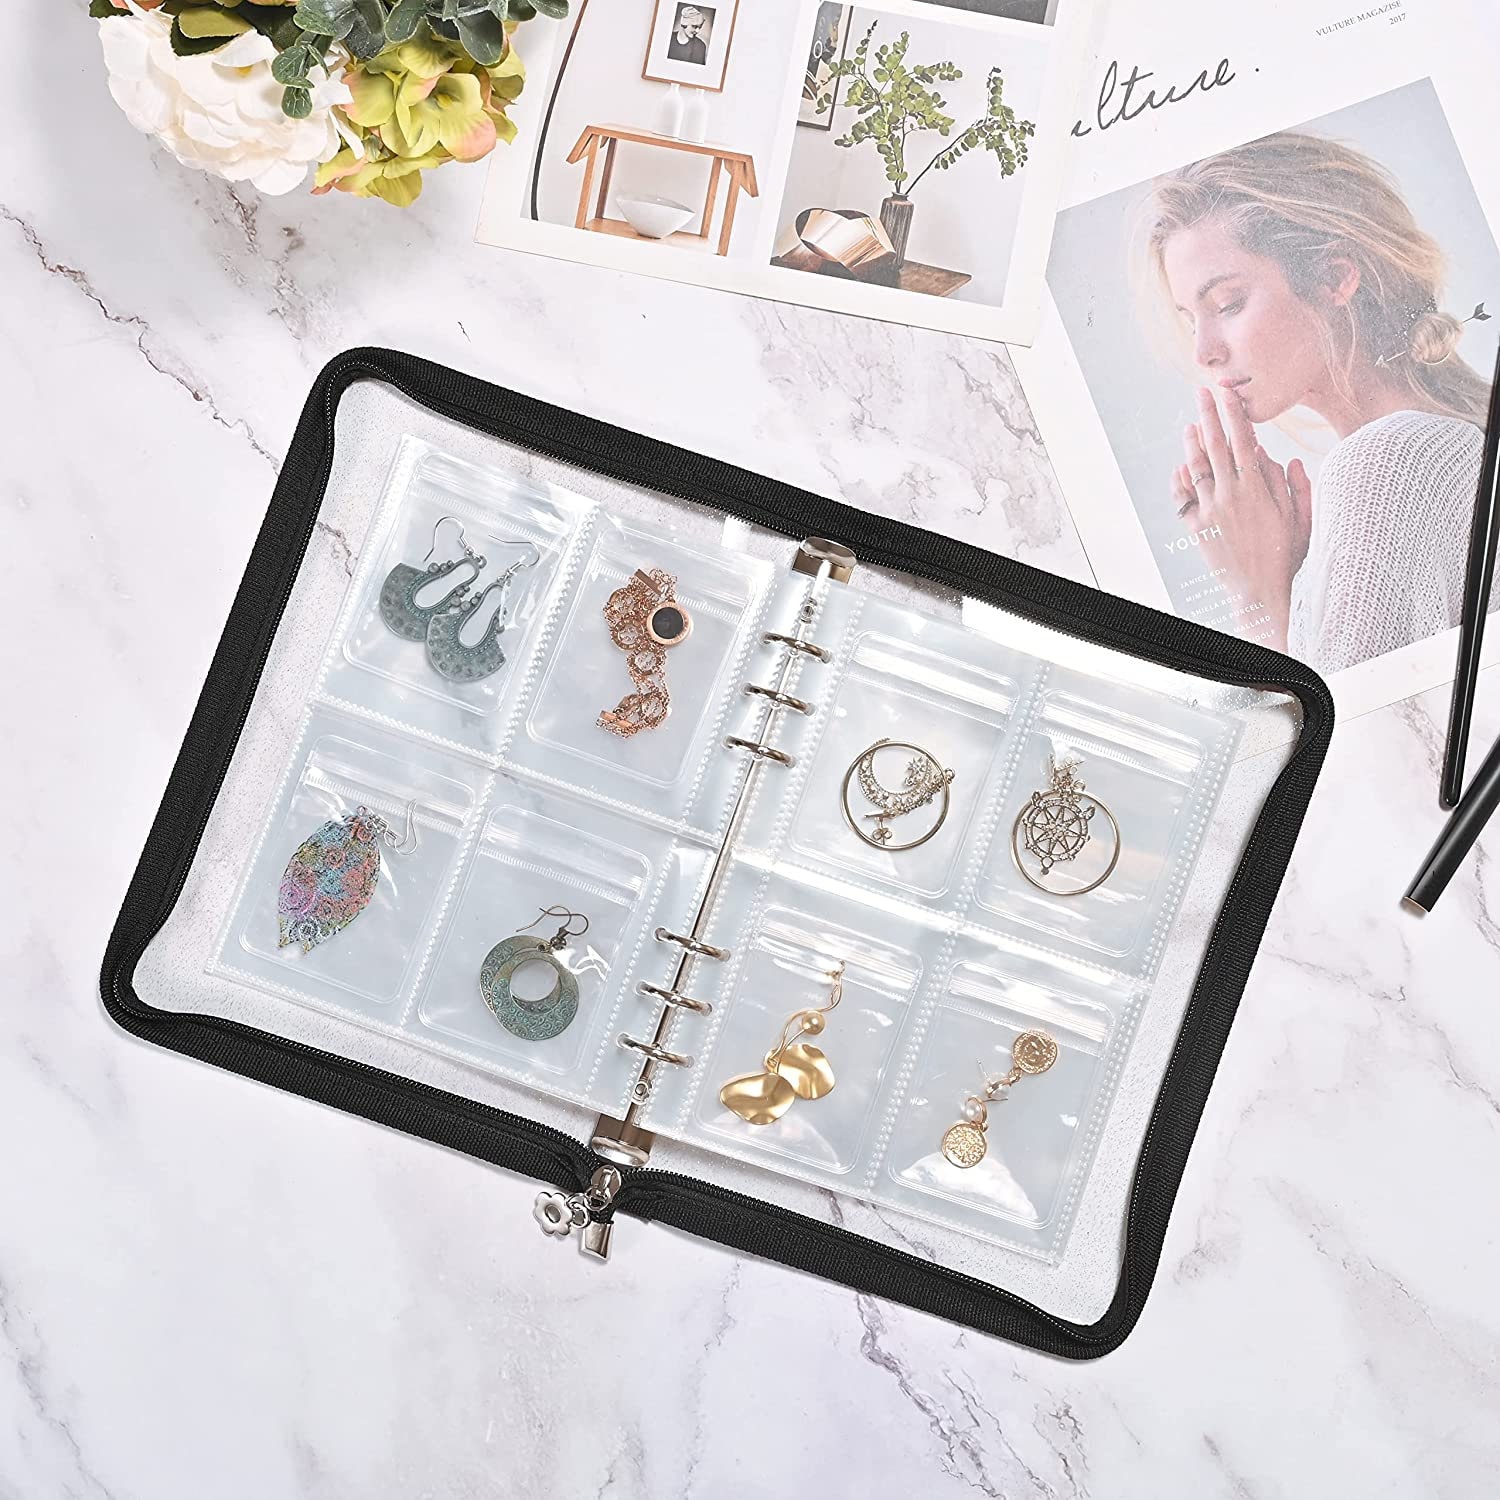 jewelry bags,Earring Organizer Storage Book Bag Transparent Poly Pouch  Travel Jewelry Earring Organizer Storage Book Bag 1 Organizer Bag with  Pockets